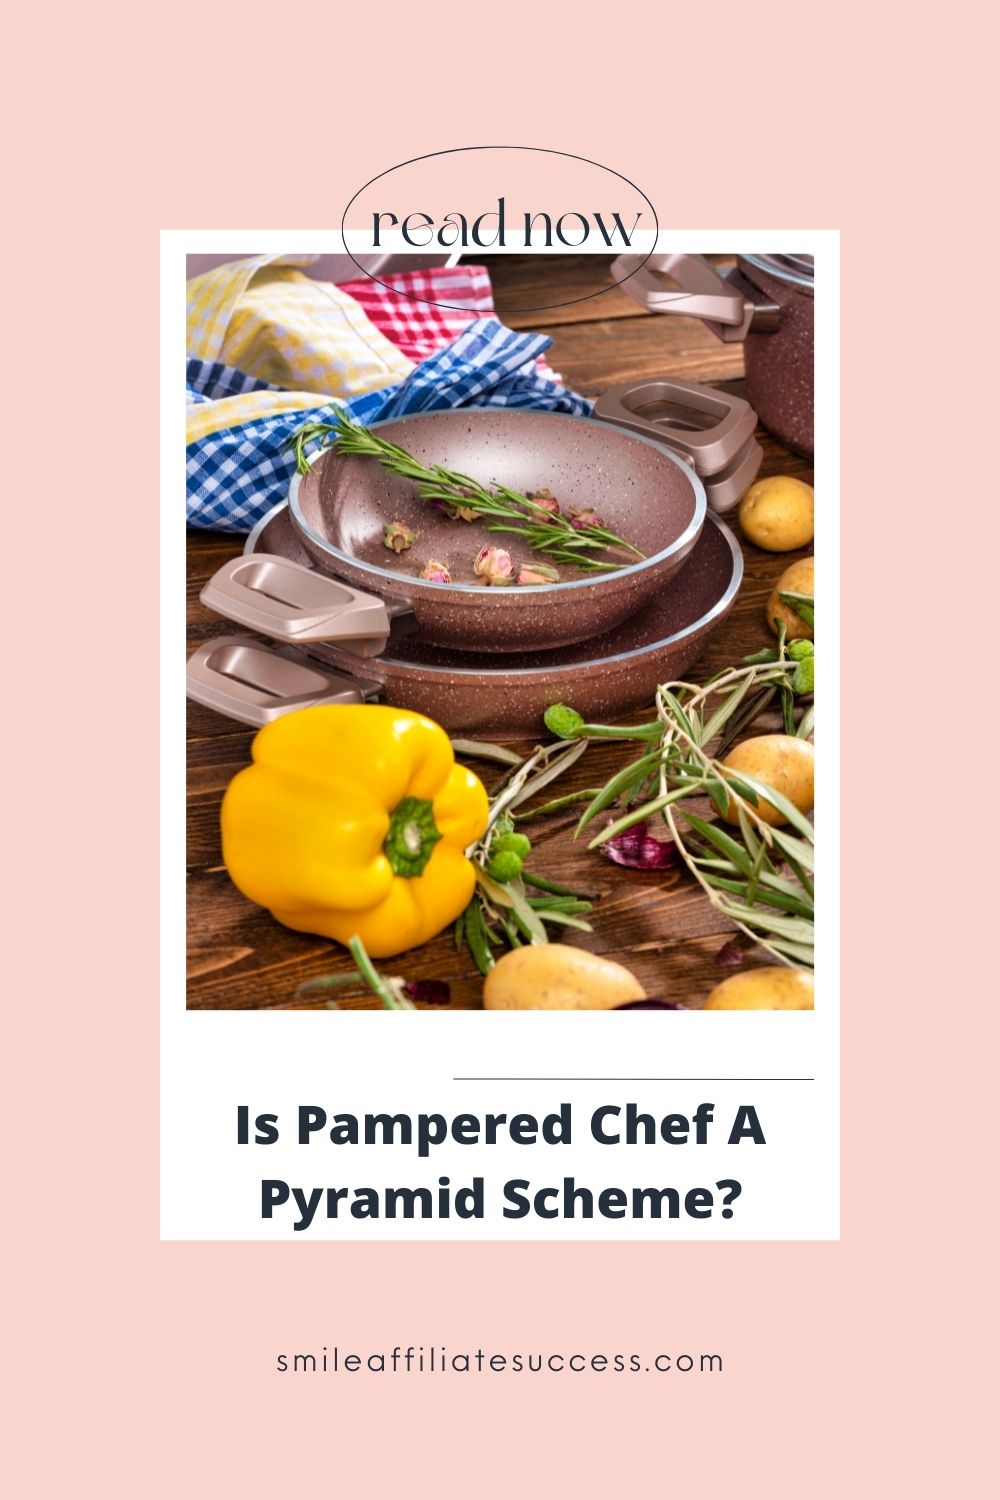 Is Pampered Chef A Pyramid Scheme?